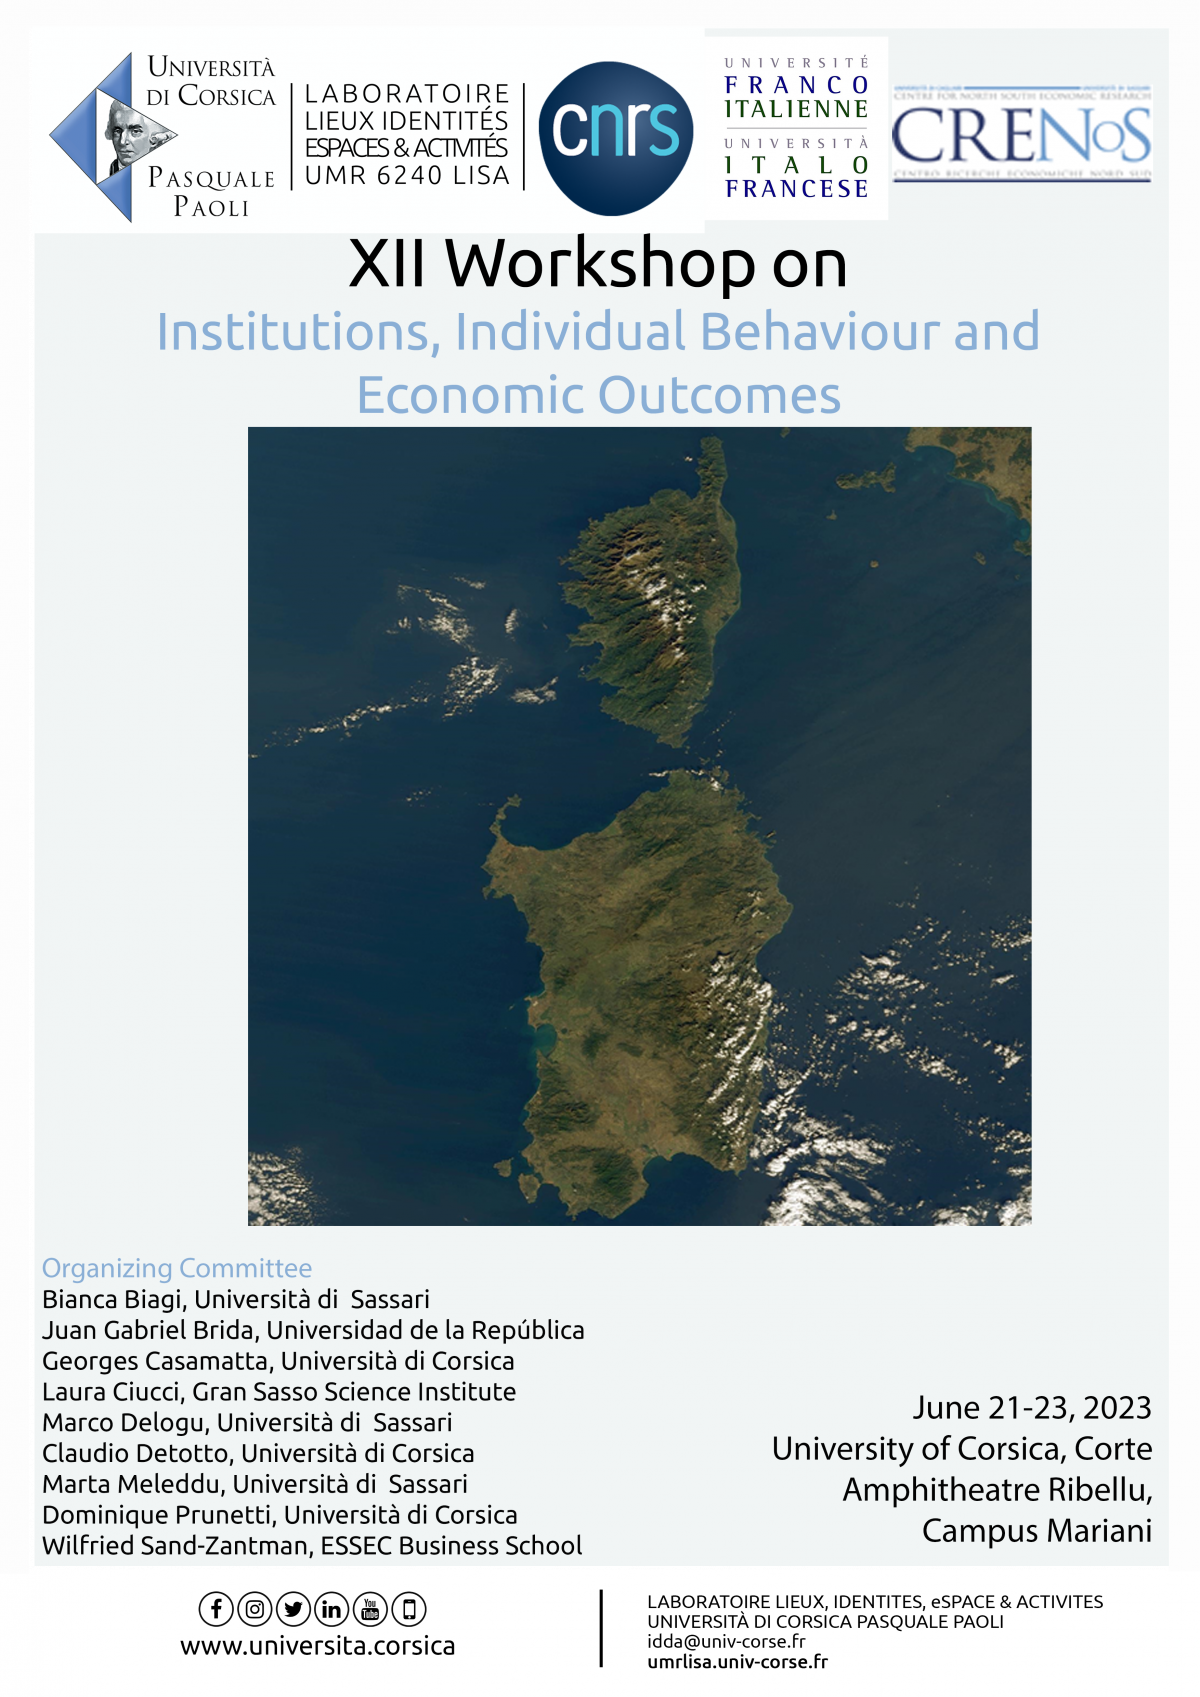 XII Workshop on Institutions, Individual Behaviour and Economic Outcomes